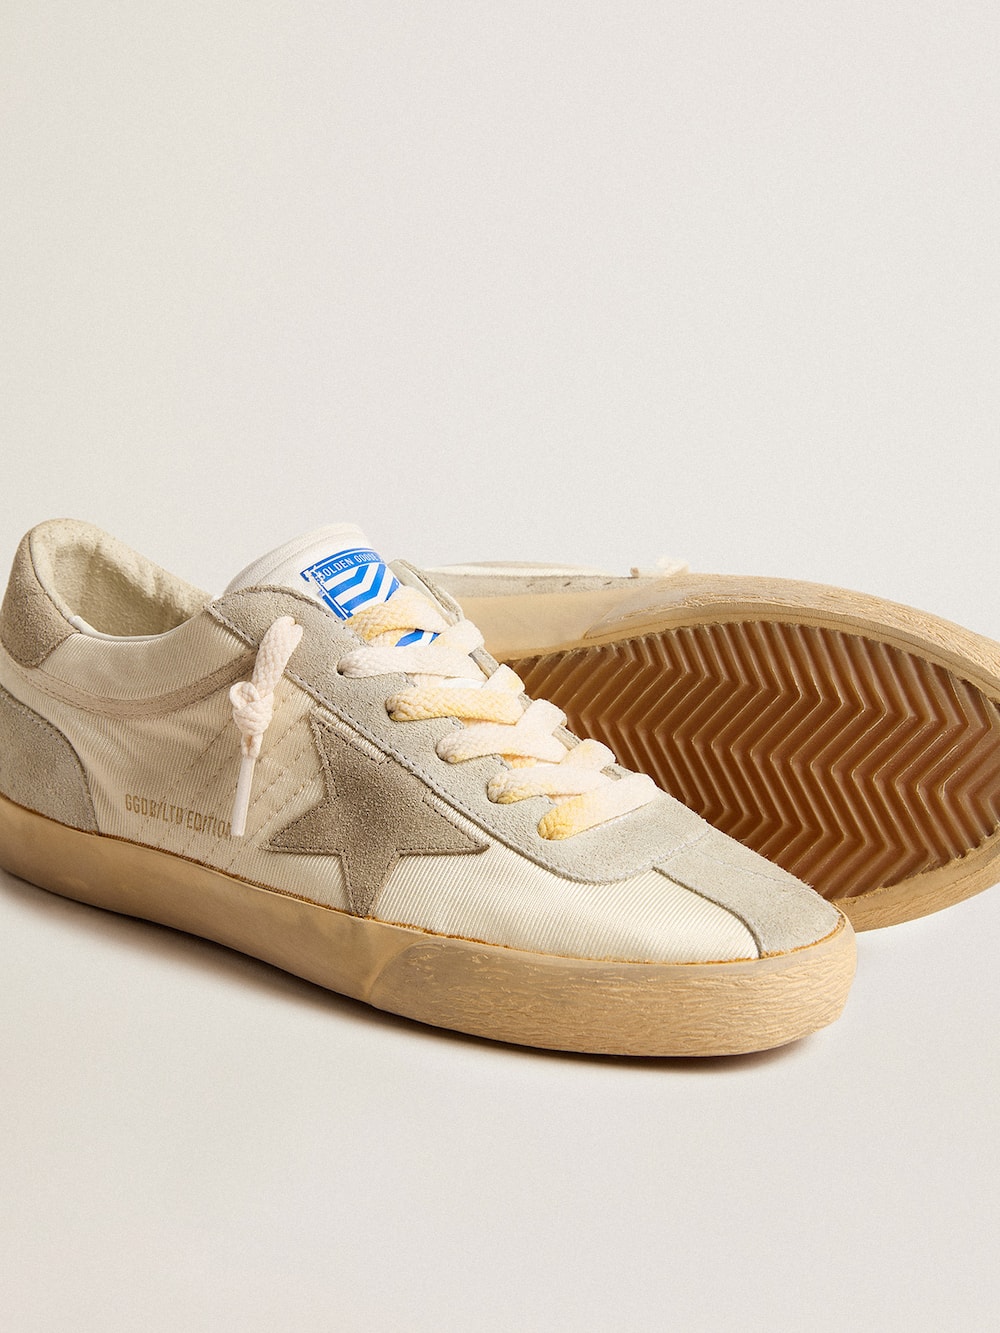 Golden Goose - Men’s Super-Star LAB in nylon with dove-gray star and ice-gray suede inserts in 